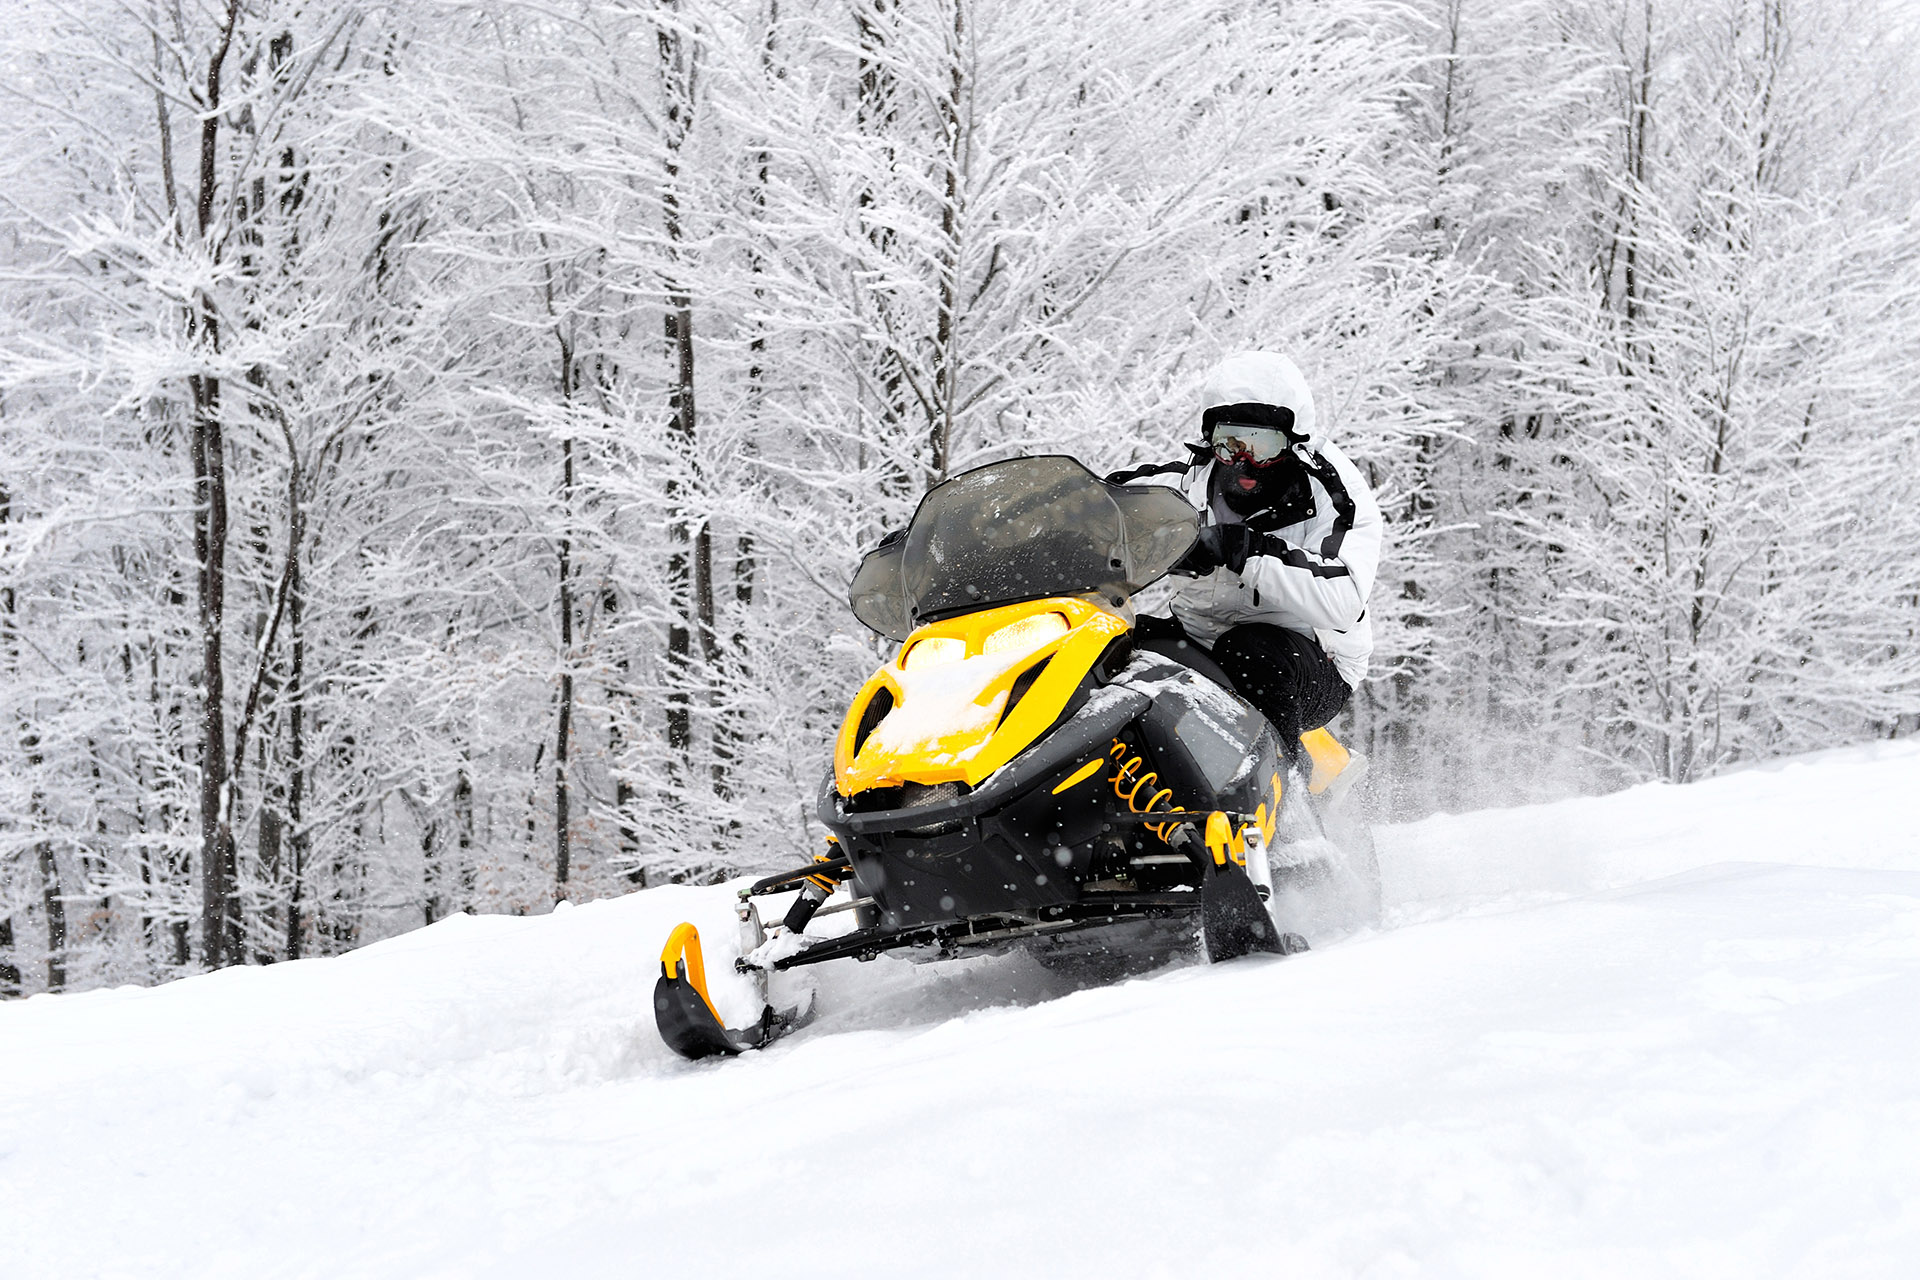 Snowmobile on fresh snow with snow covered trees in background